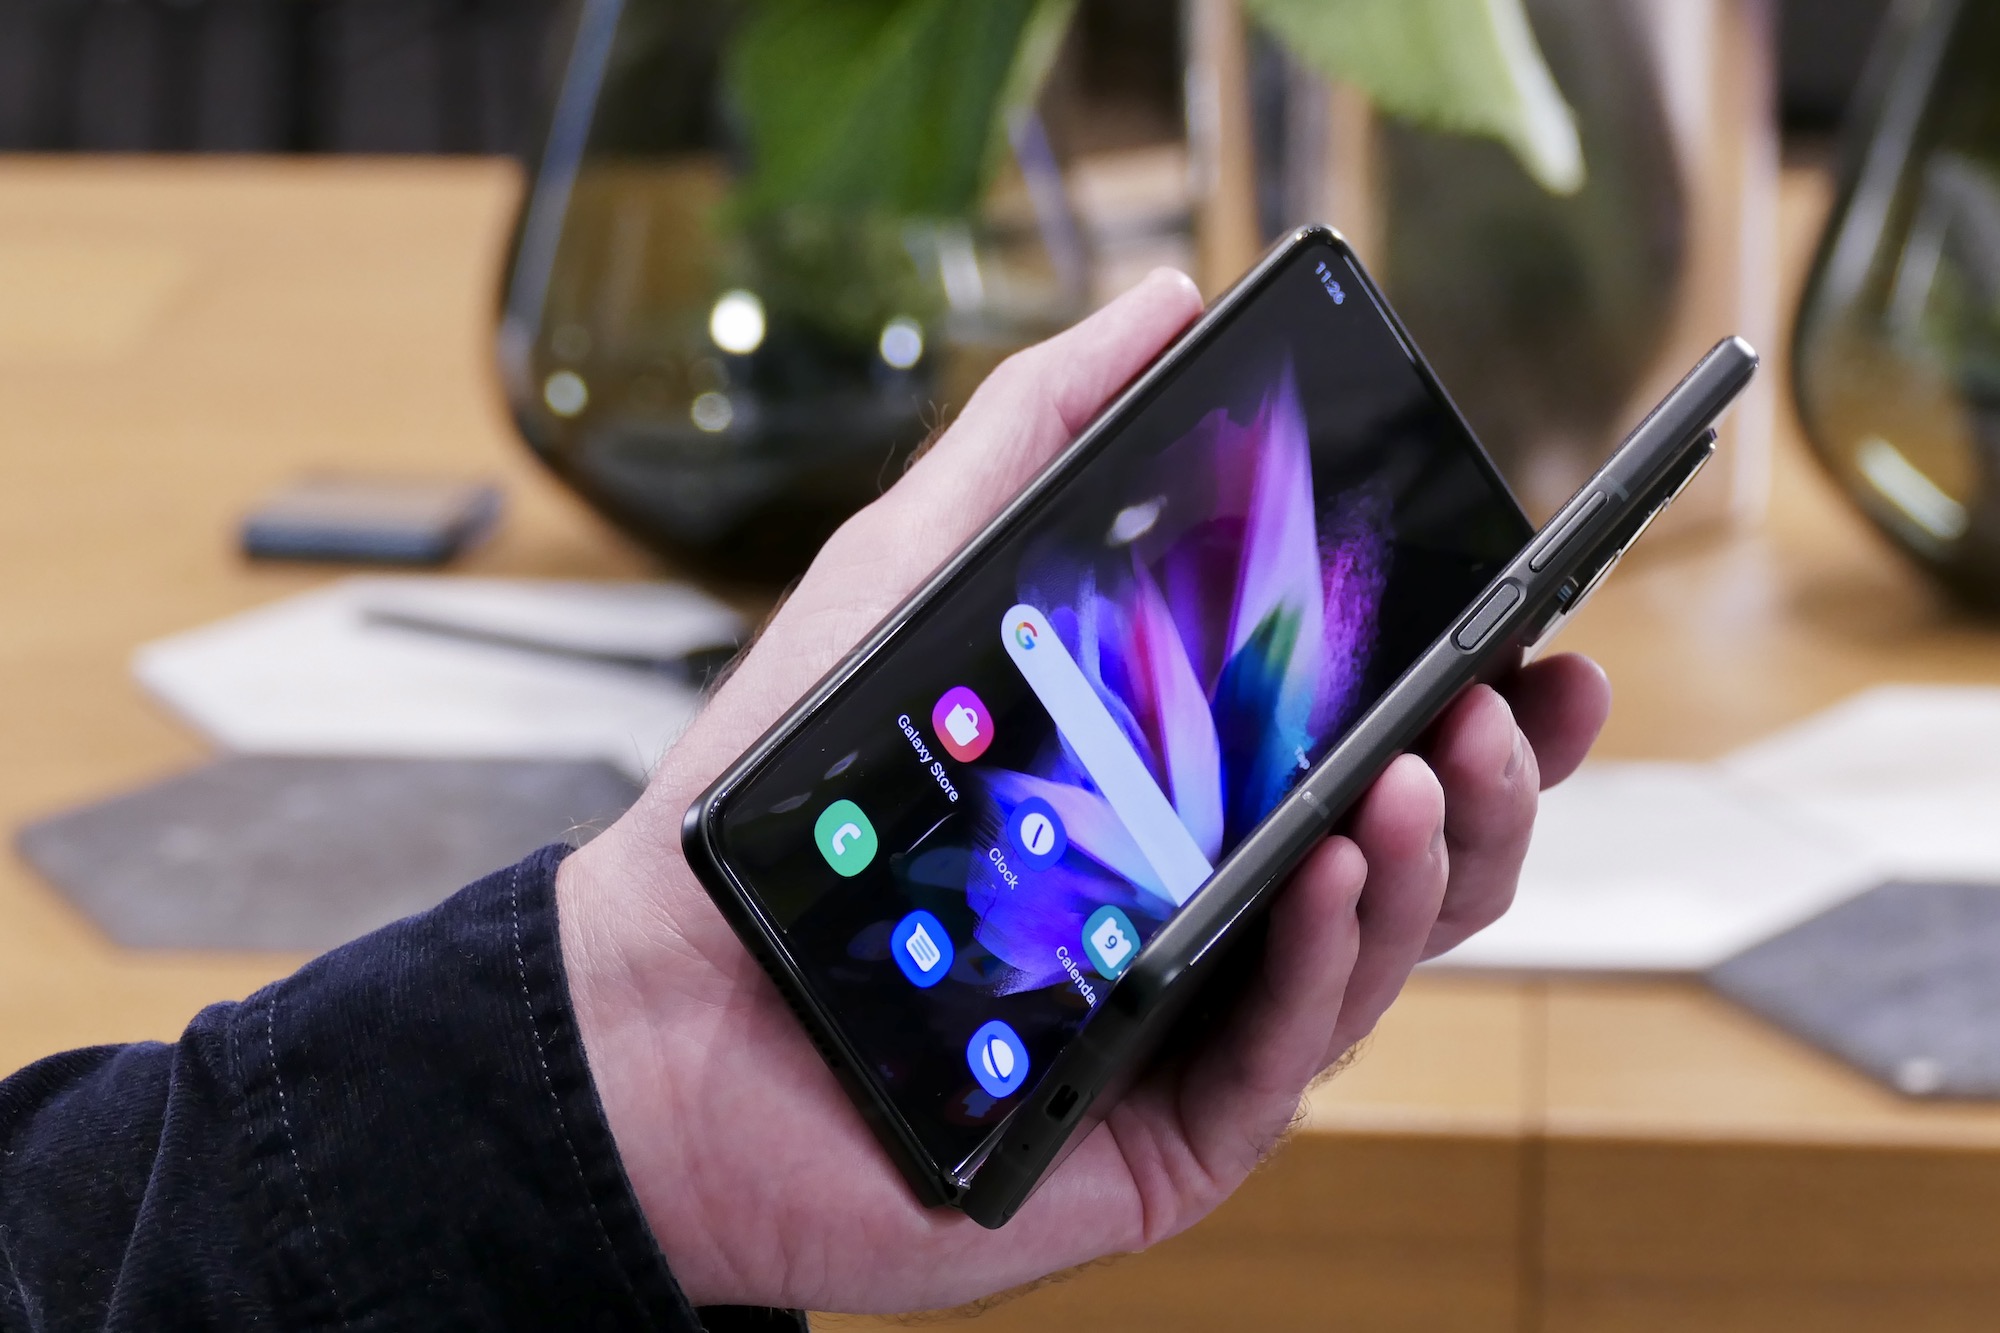 Galaxy Z Fold 3 almost closed in hand.